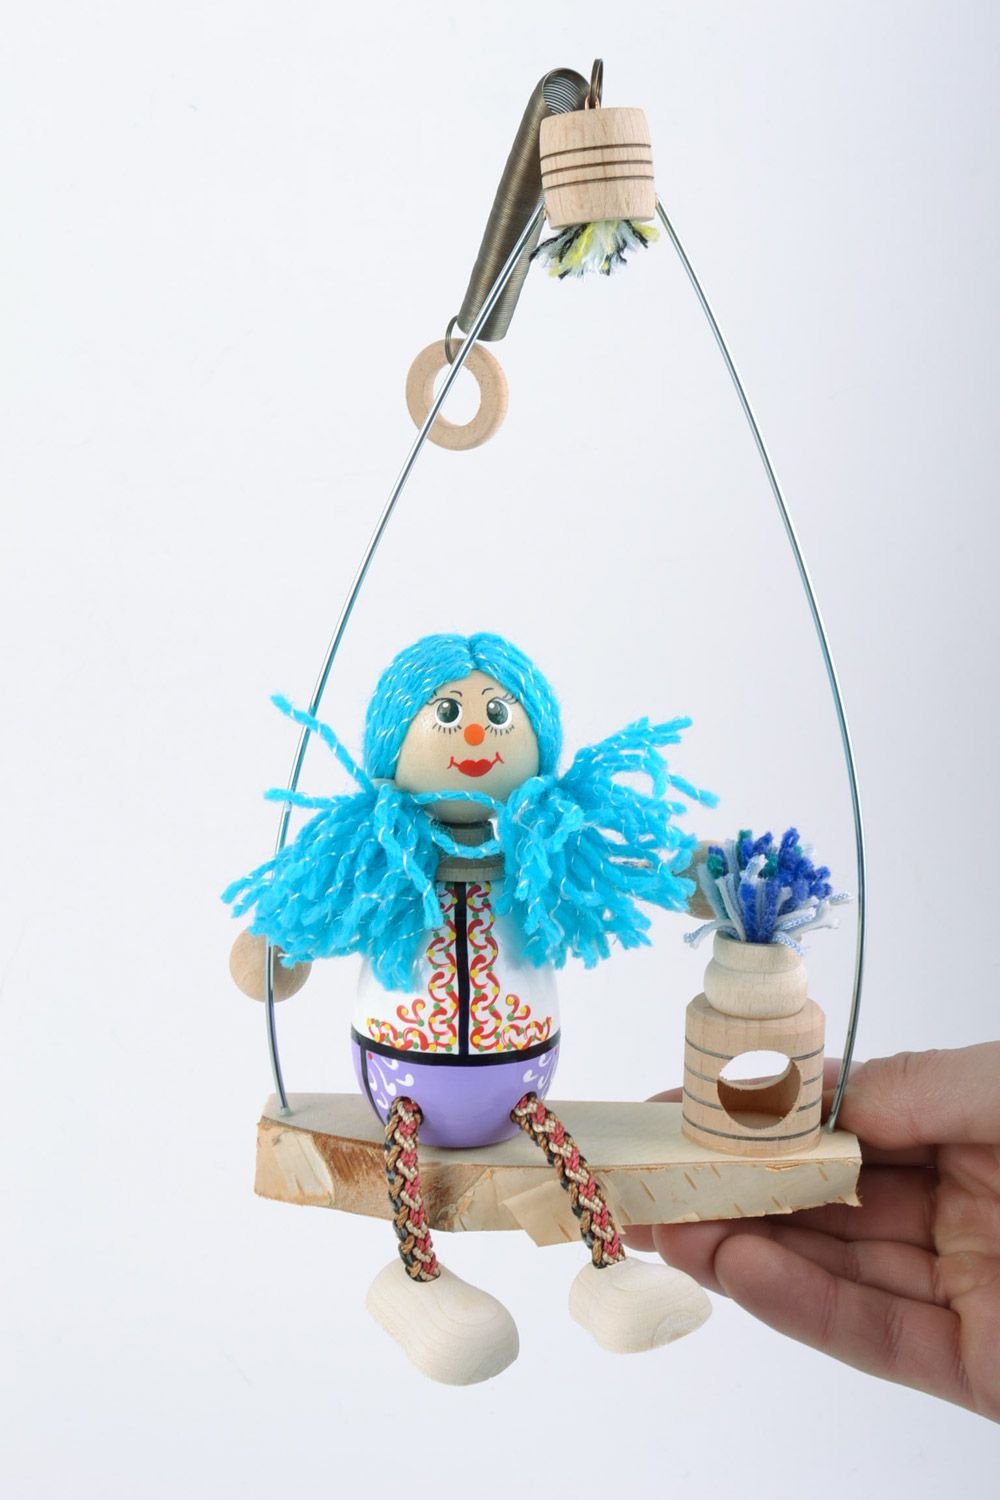 Handmade painted wooden eco toy girl with blue hair for children and interior photo 1